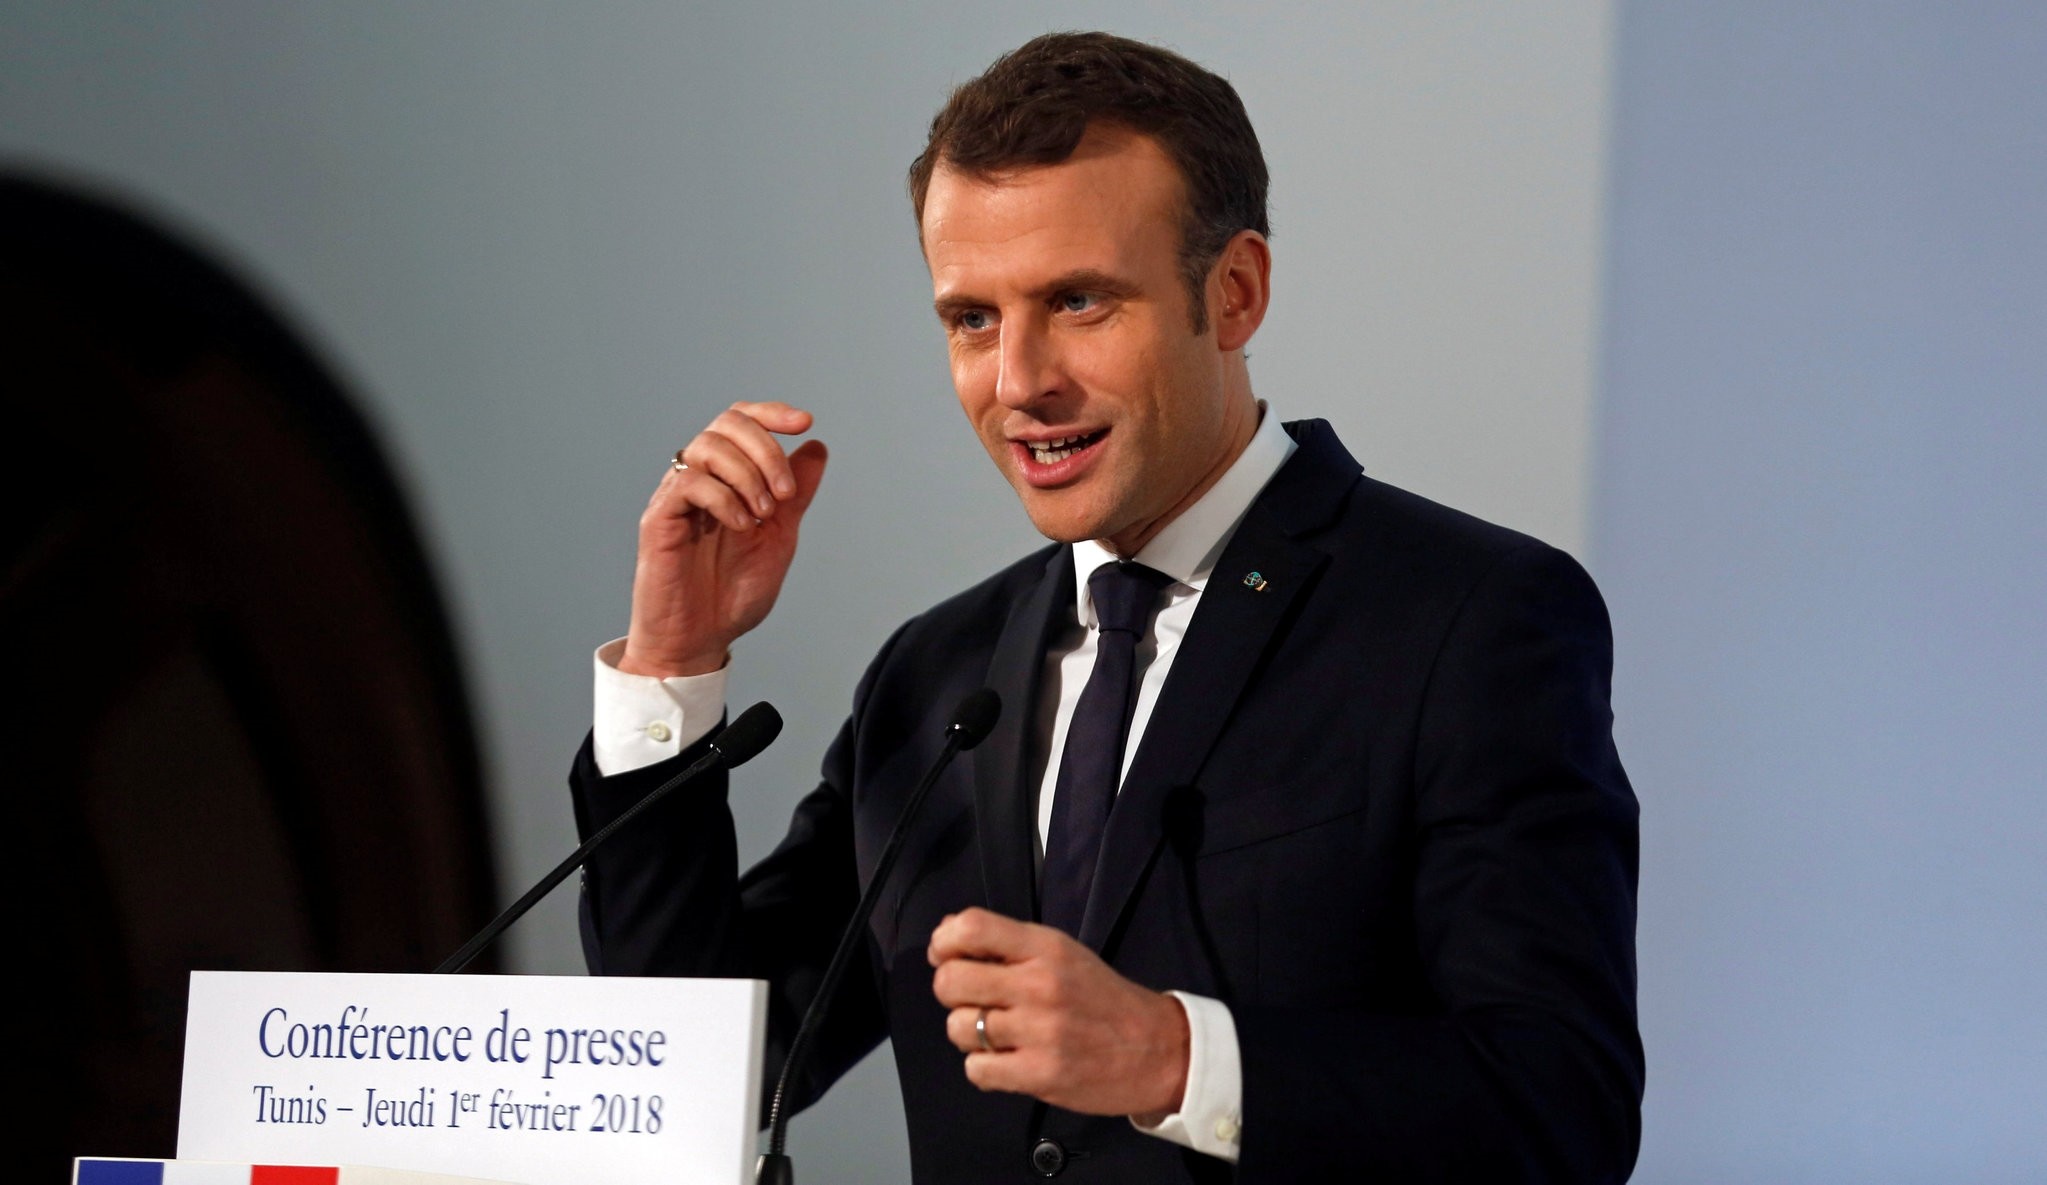 French President Emmanuel Macron delivers a speech to members of the French community in Tunisia, in the capital Tunis on January 31, 2018. (REUTERS Photo)